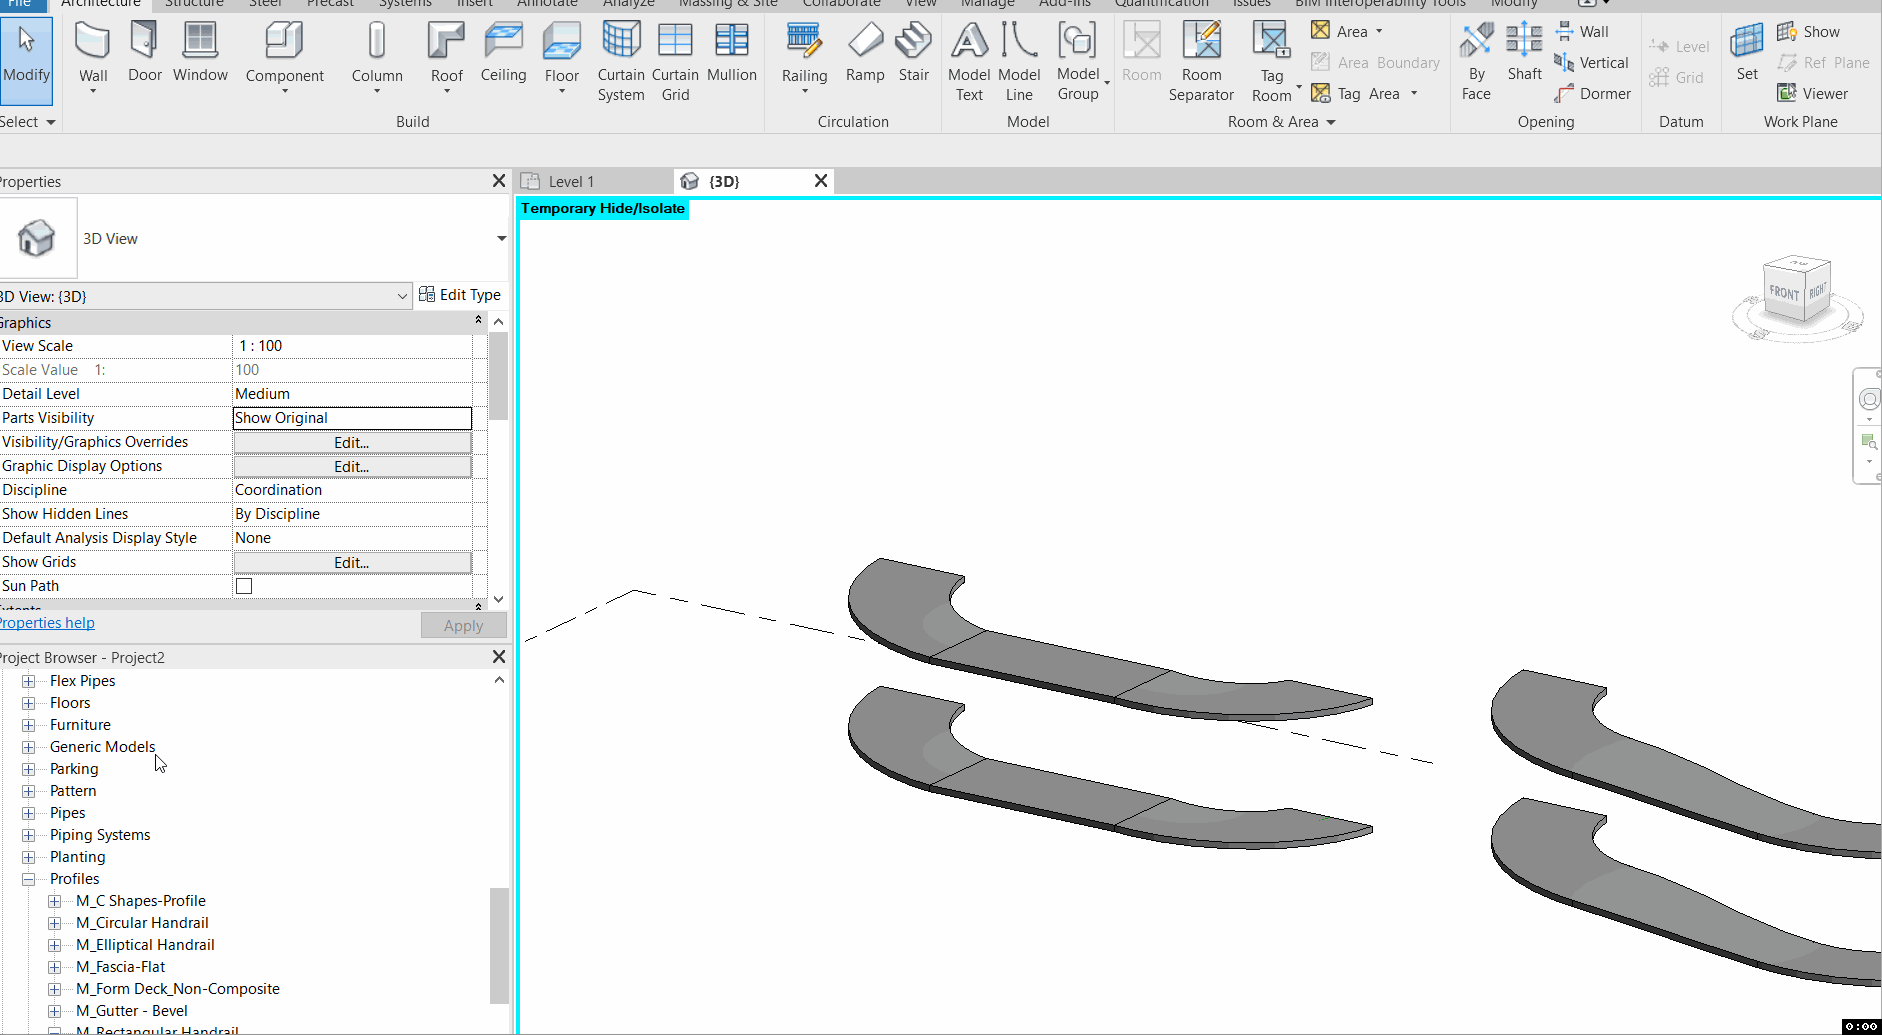 How to Create Animated GIFs in Revit